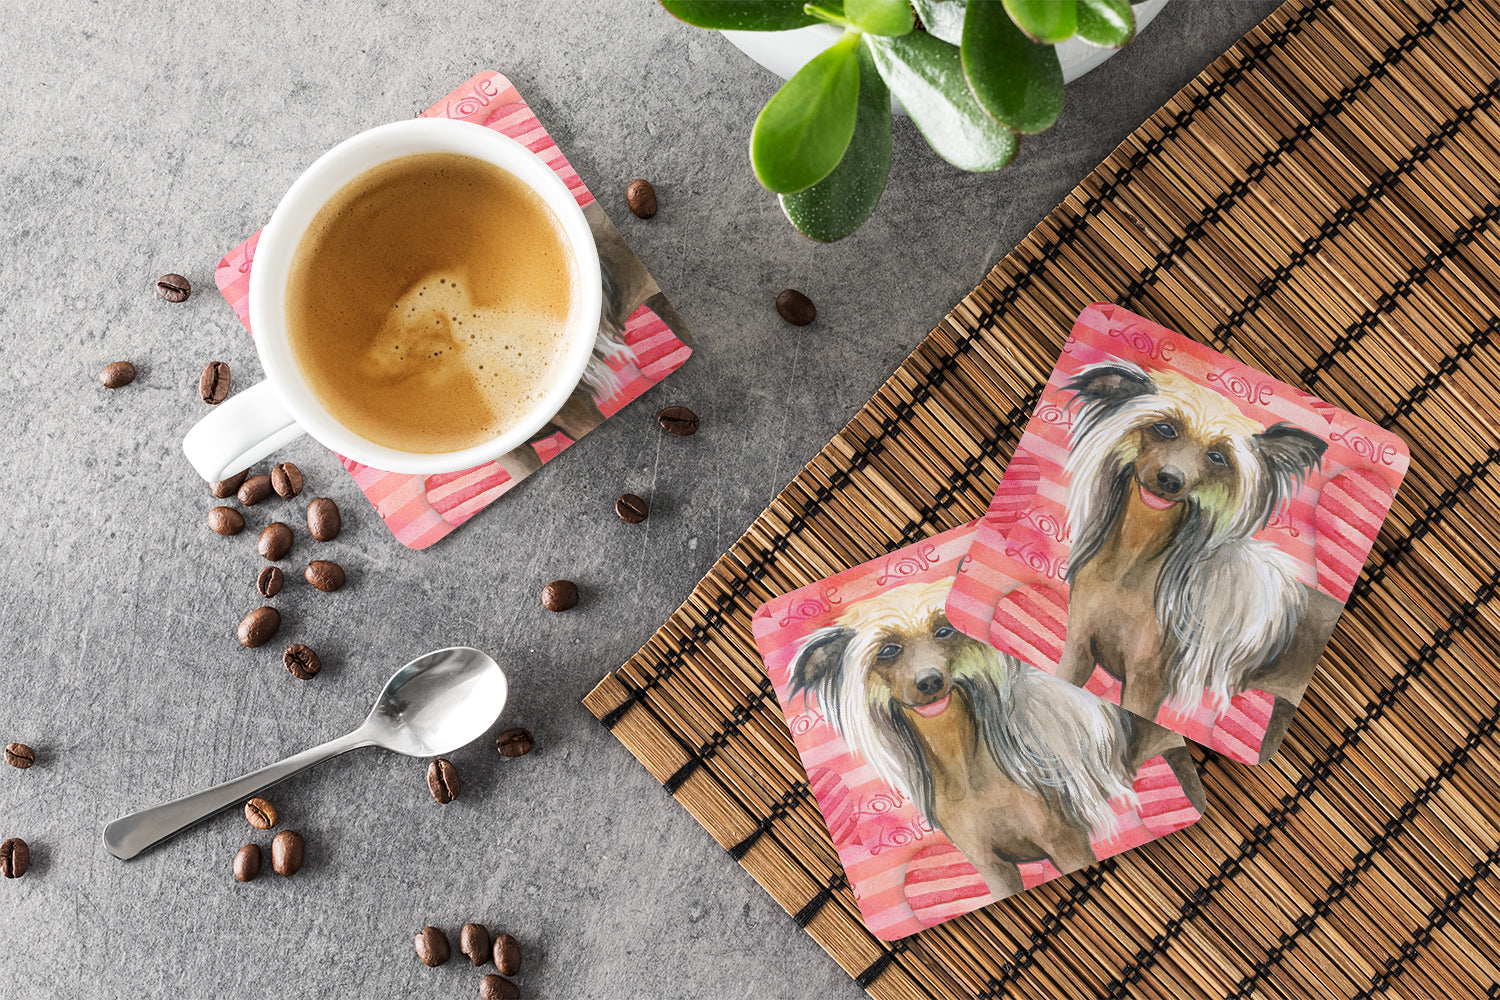 Chinese Crested Love Foam Coaster Set of 4 BB9746FC - the-store.com